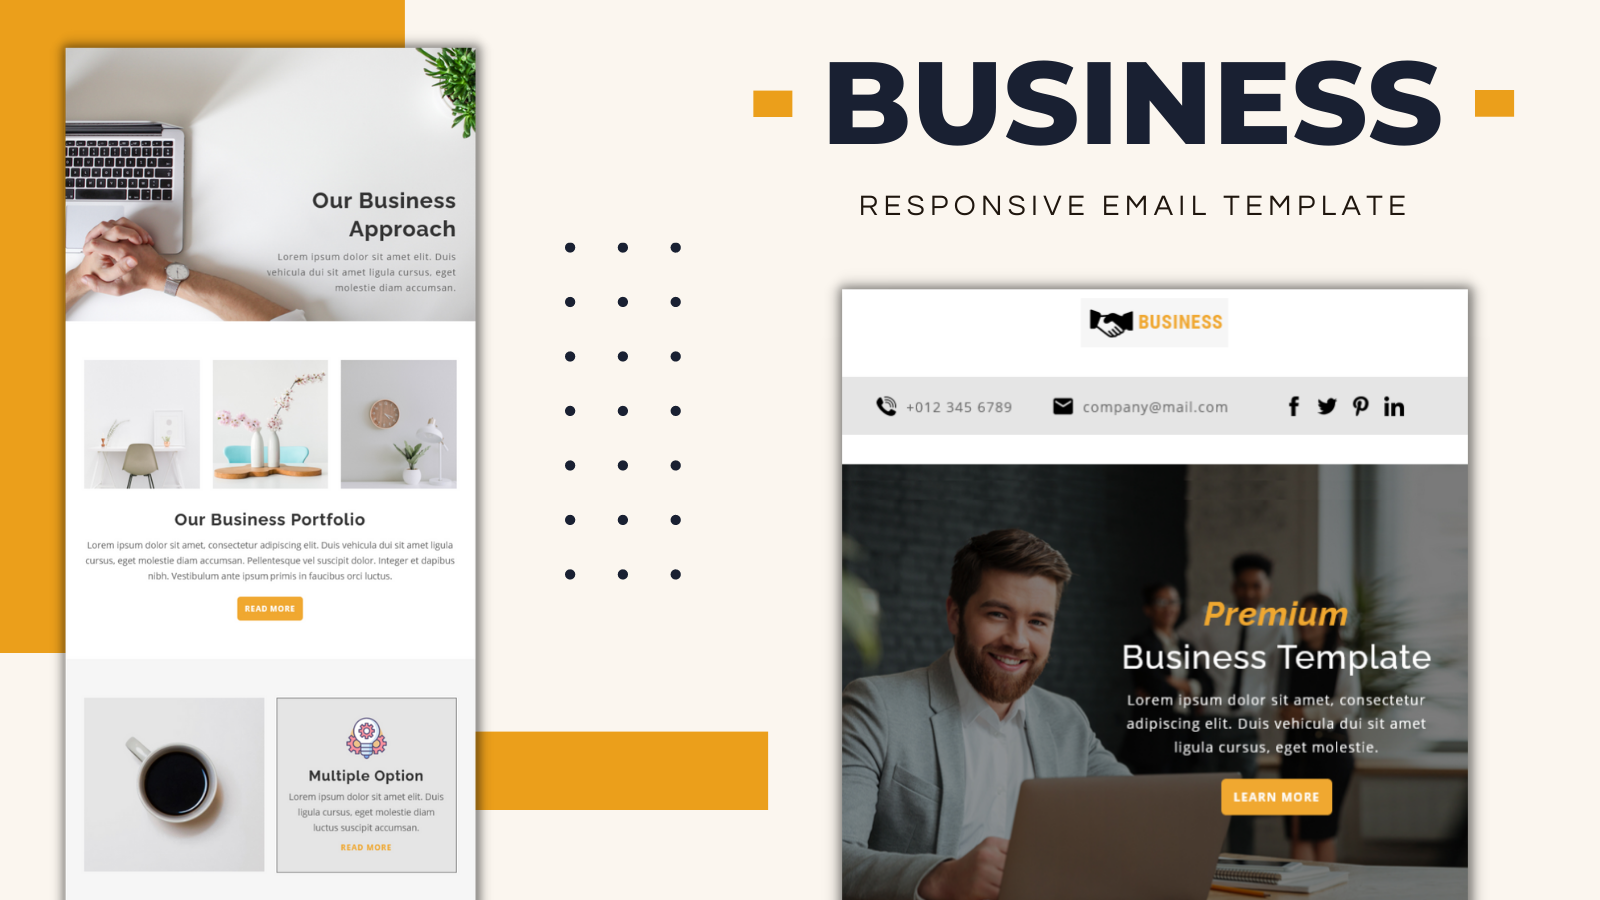 Kit Graphique #343940 Business Campagne Web Design - Logo template Preview